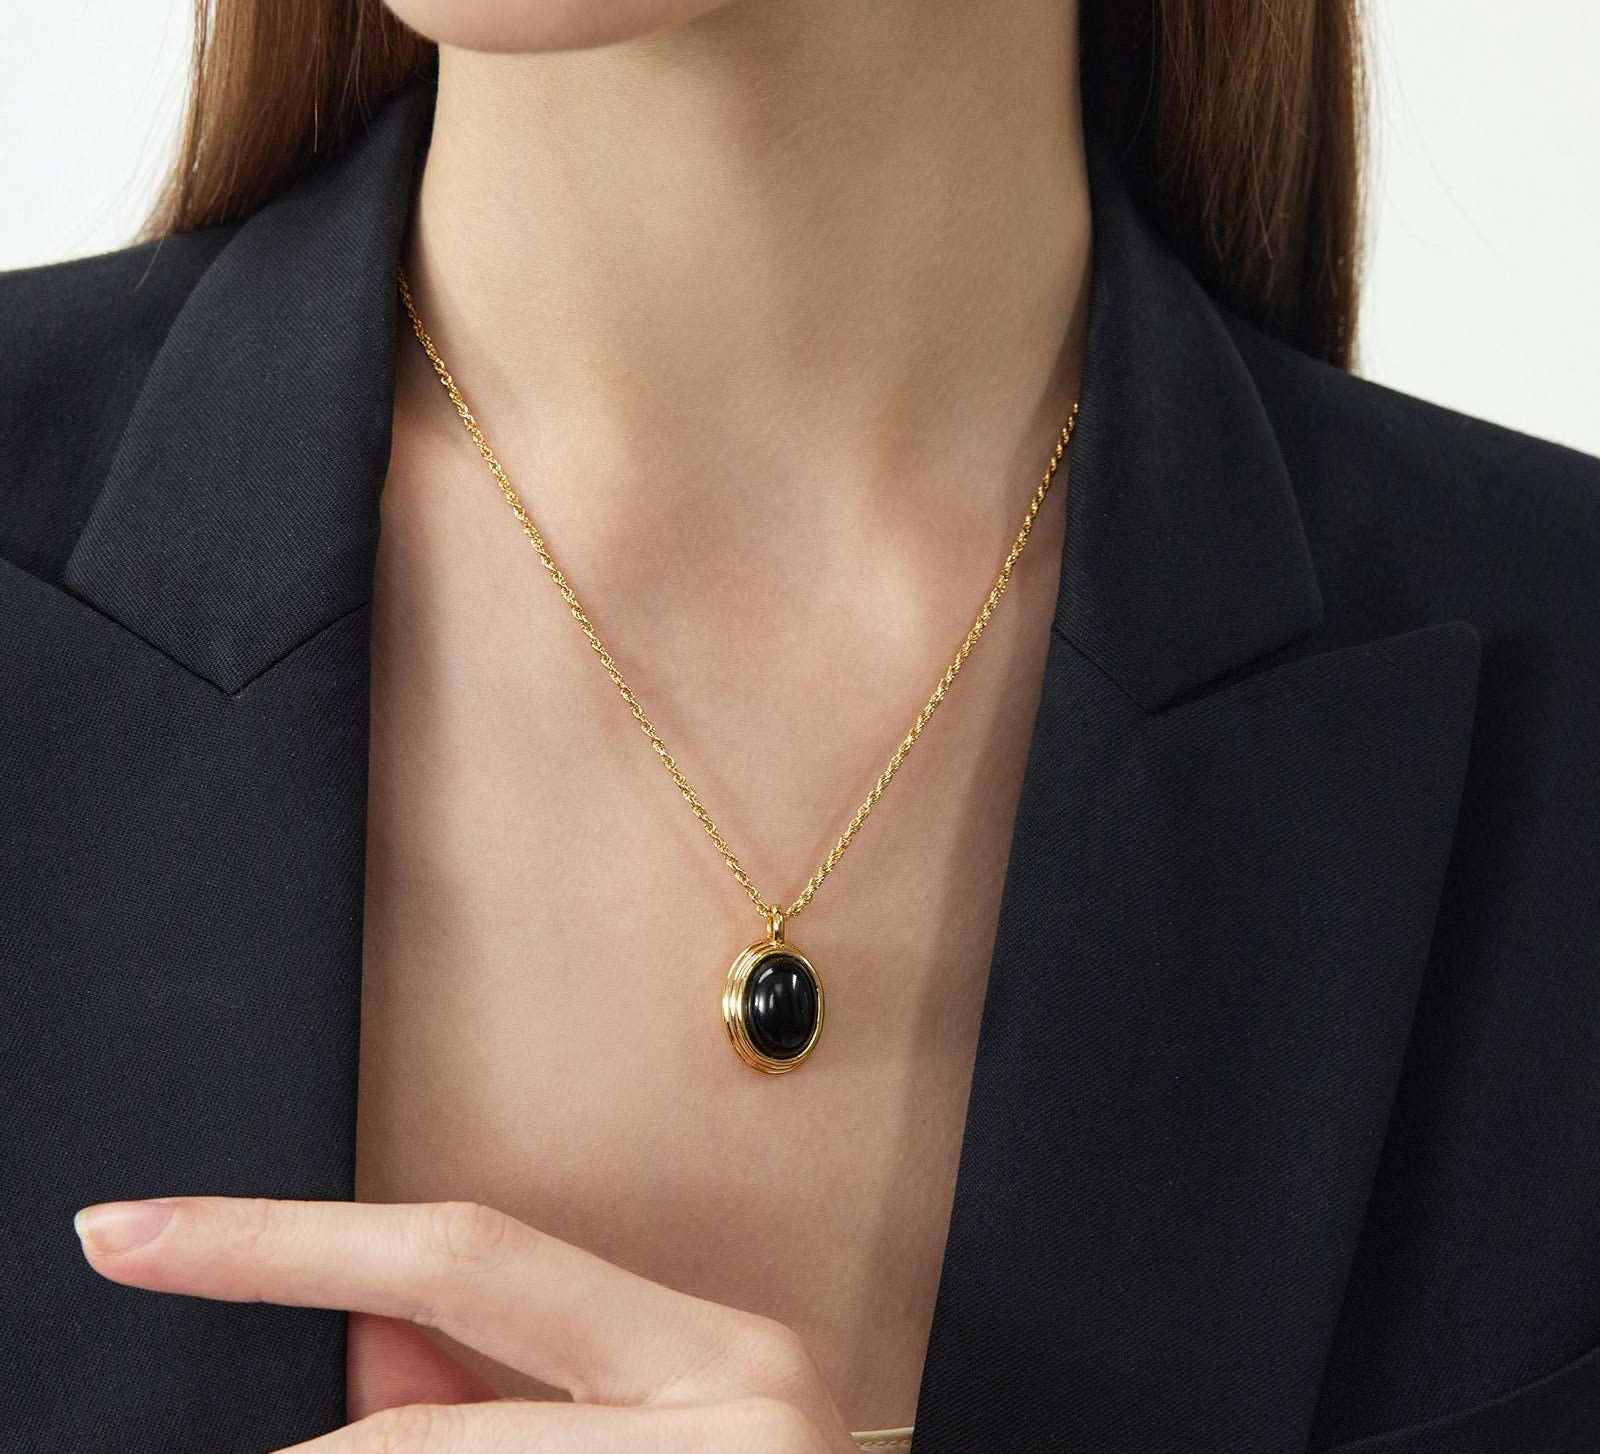 Luxe Black Gleam: Gold Pendant Necklace with Black Agate, with a luxe black gleam, this necklace captures the allure of black agate in a gold setting, adding a touch of opulence and sophistication to your neckline